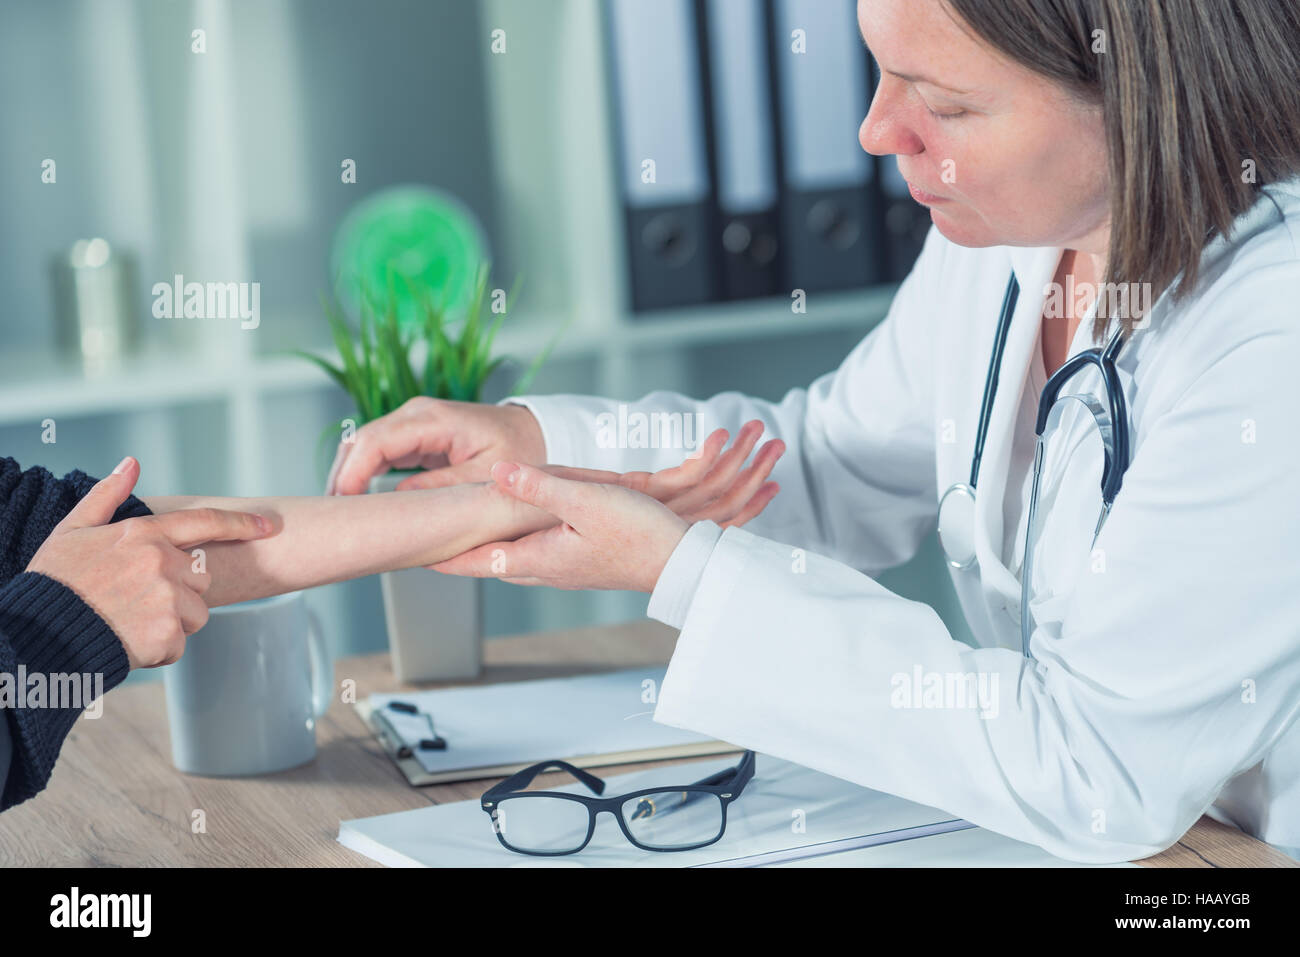 Female patient at orthopedic medical exam in doctor's hospital office, traumatology and medical consultation for hand wrist injury Stock Photo